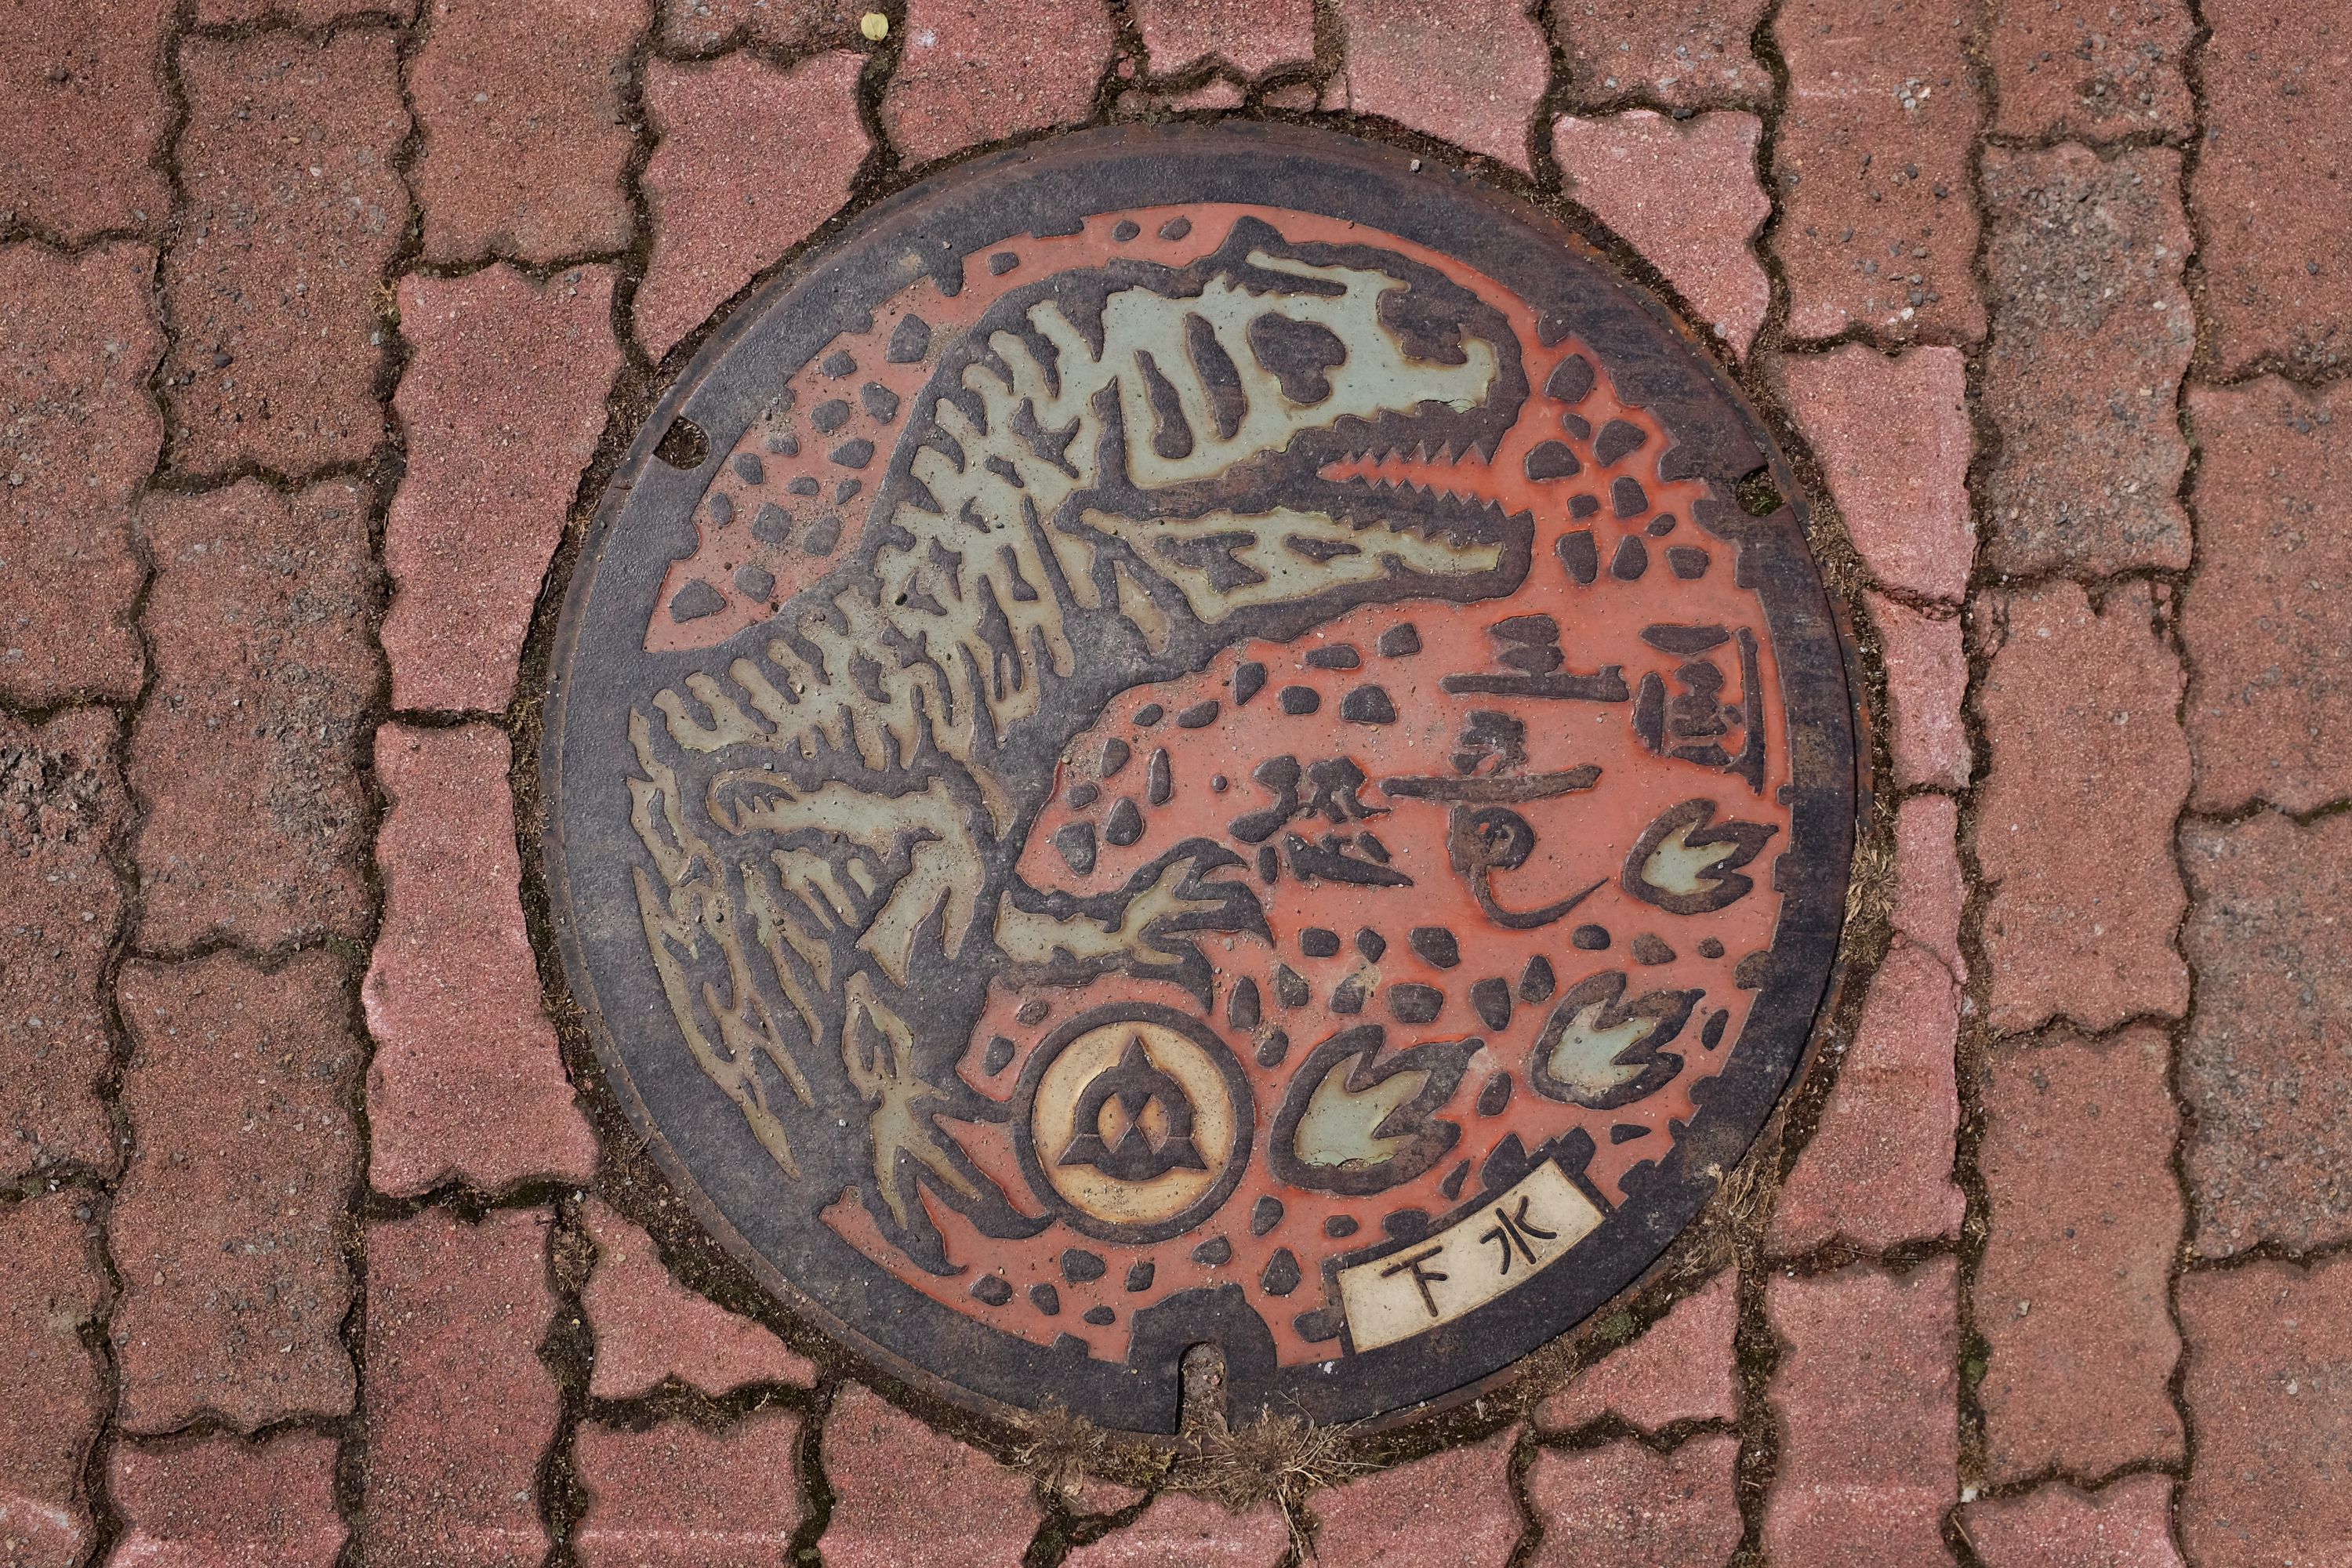 Manhole cover showing a theropod dinosaur.